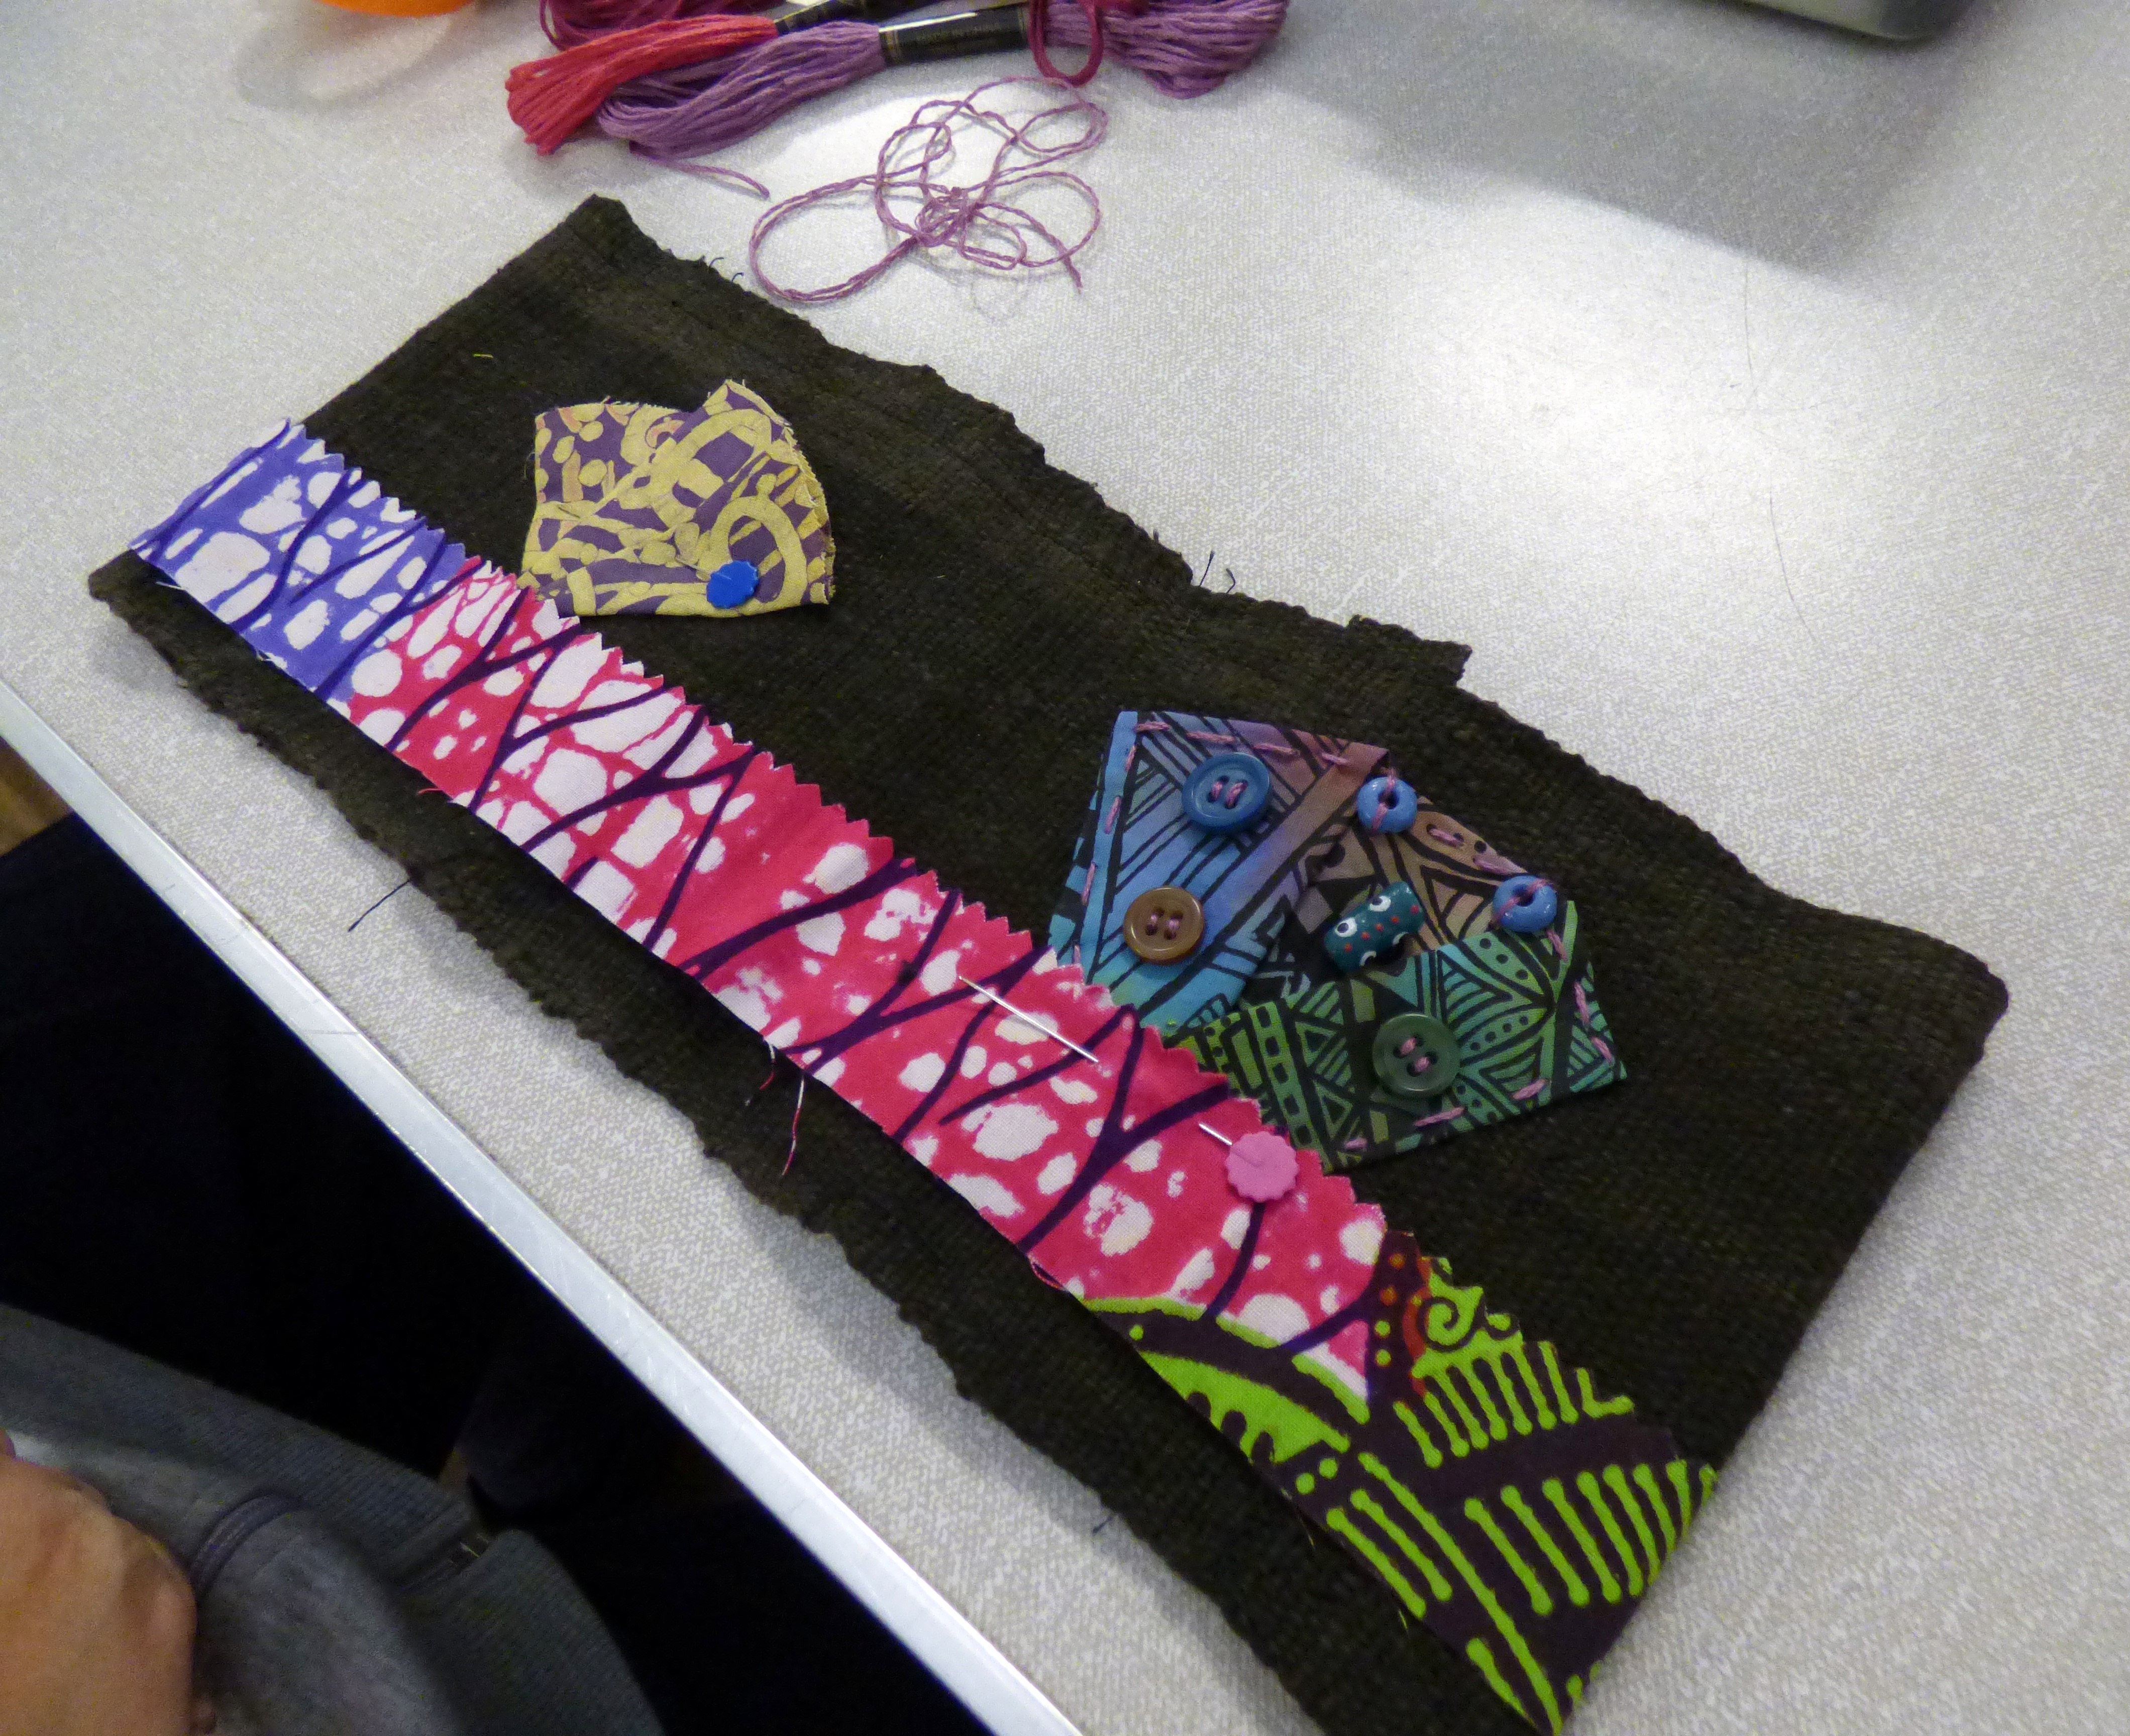 student's work at "Creative with Strip Cloth" workshop with Magie Relph, September 2016